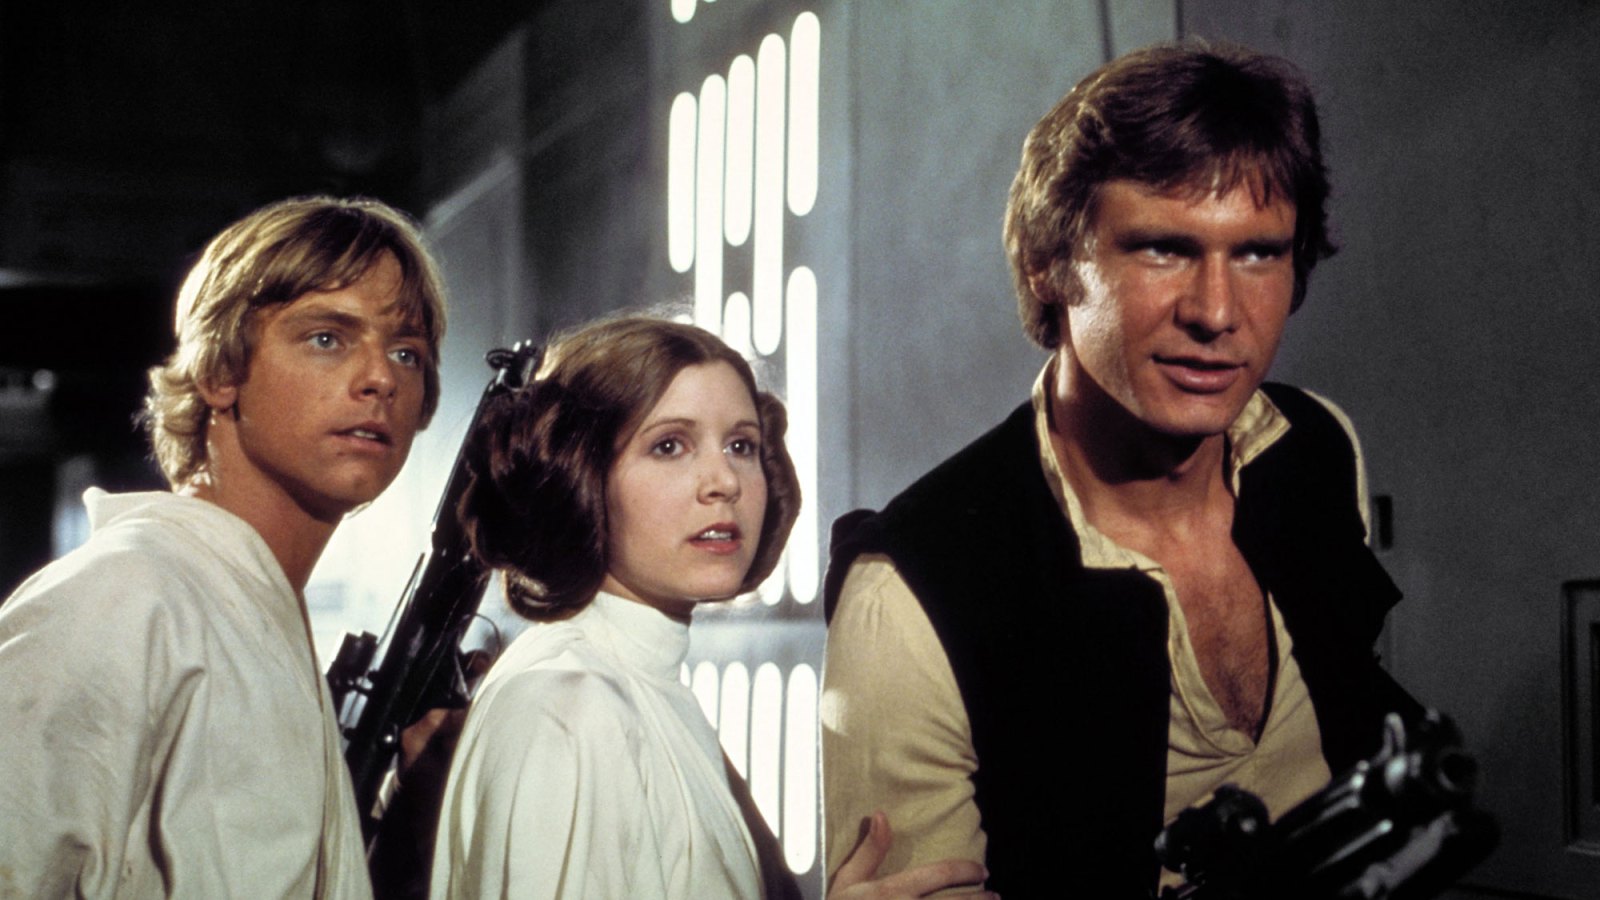 How to Watch All of the Star Wars Movies in Order